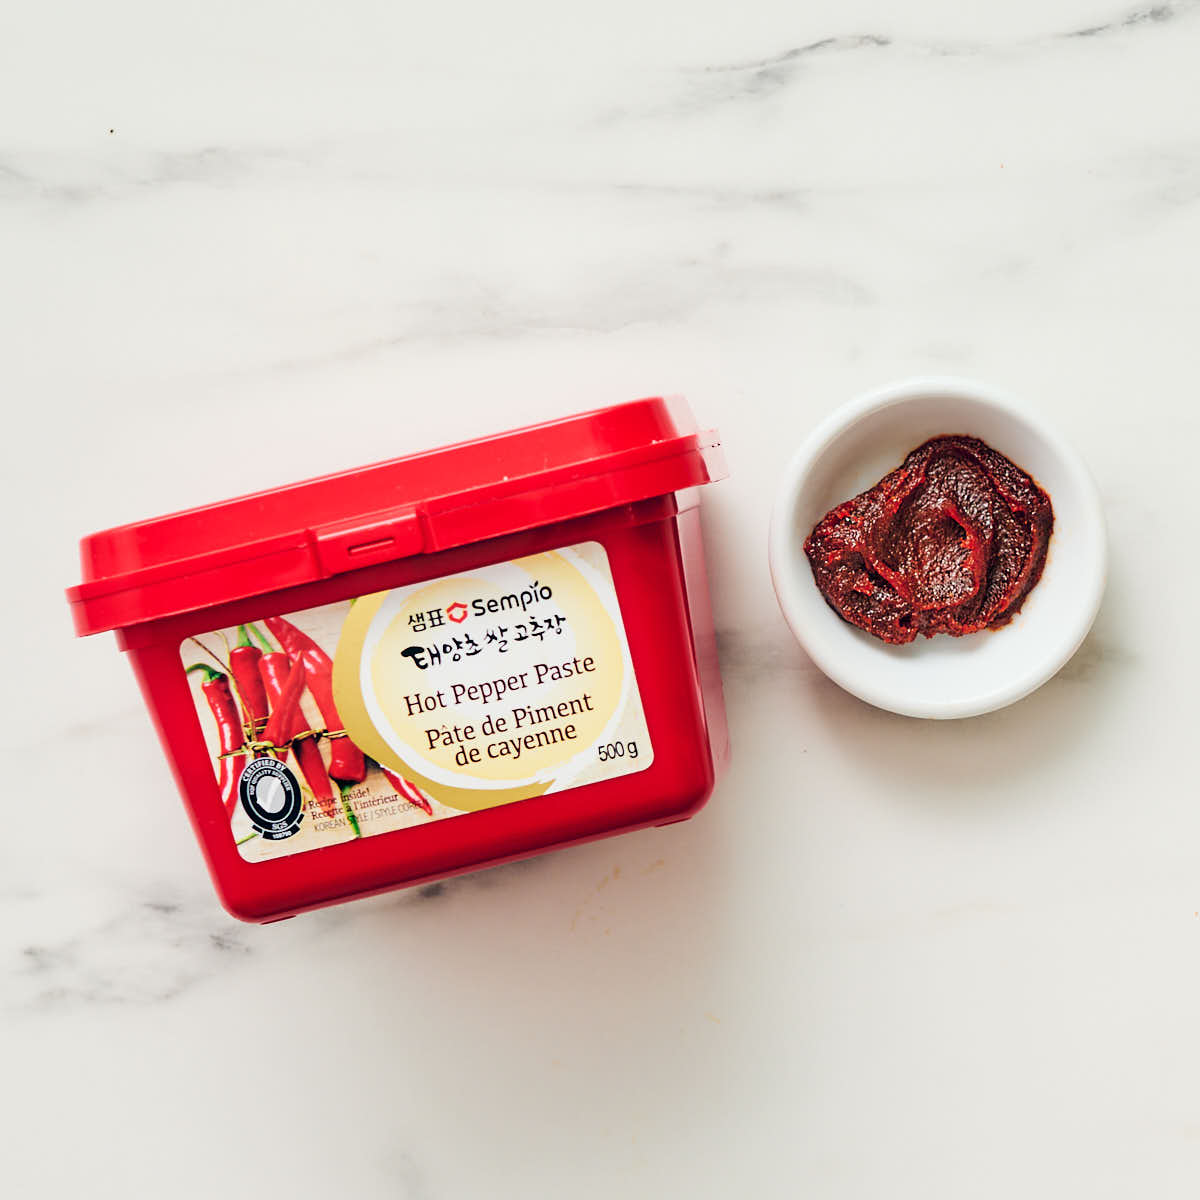 Gochujang (Korean chili paste) in a red package with a small bowl of paste scooped out.